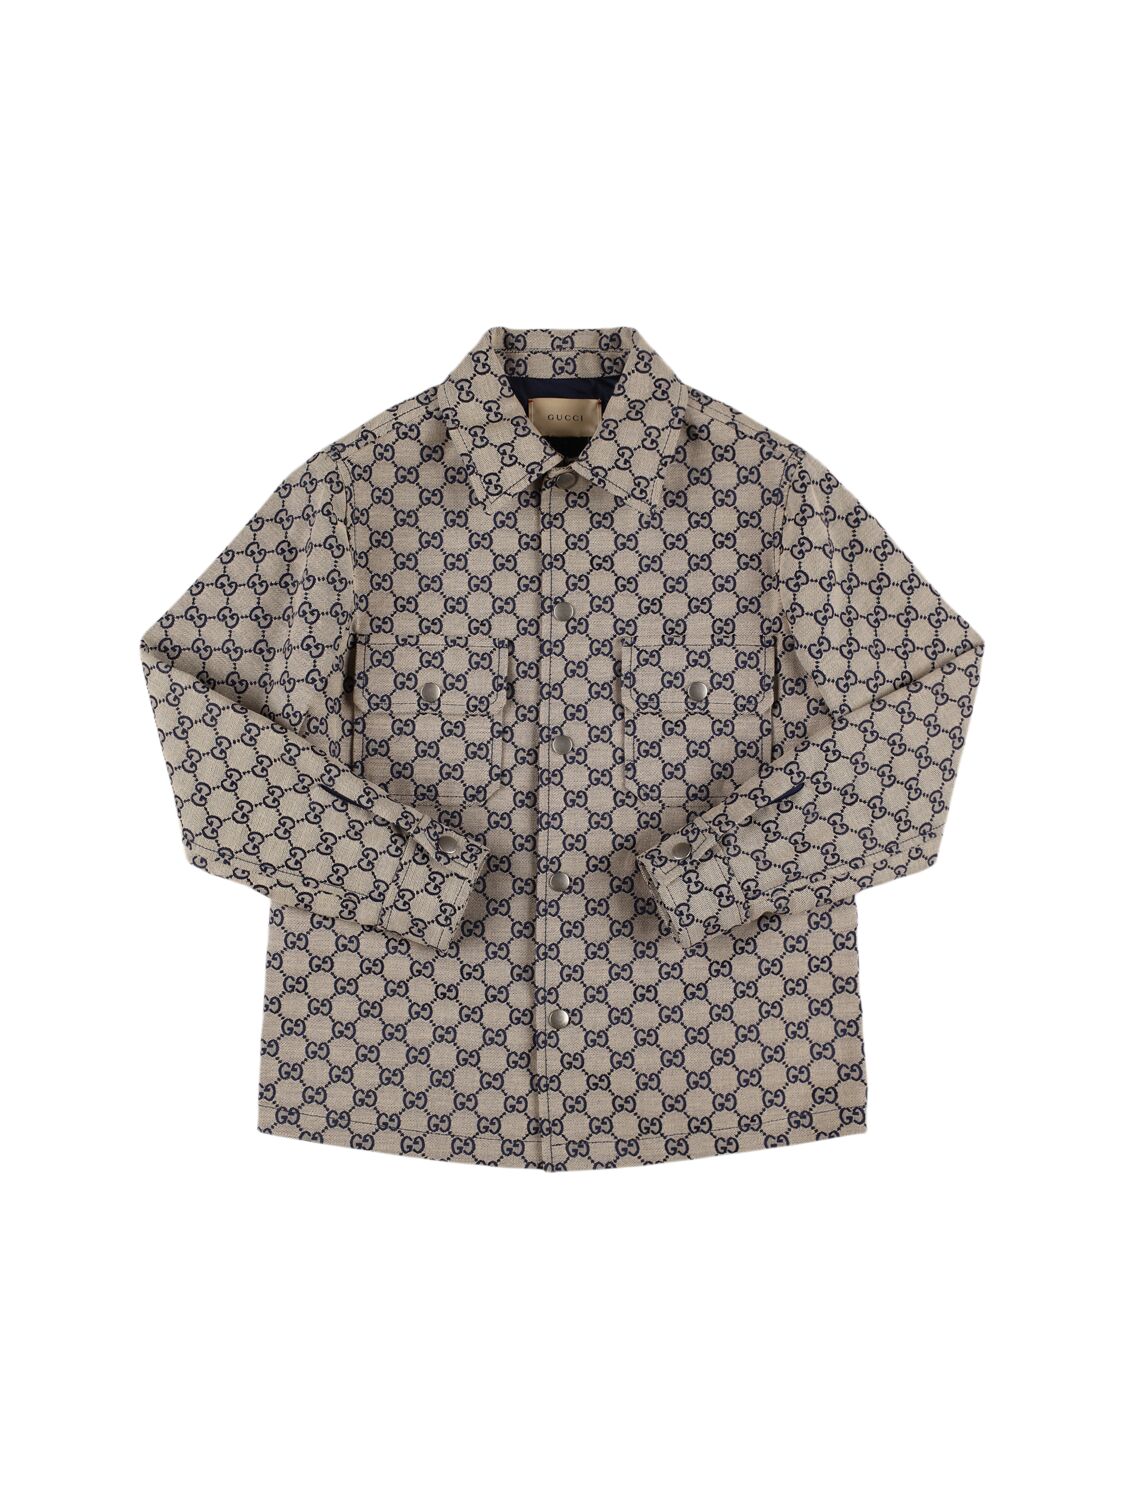 Gucci Gg Canvas Cotton Caban Jacket In Gray